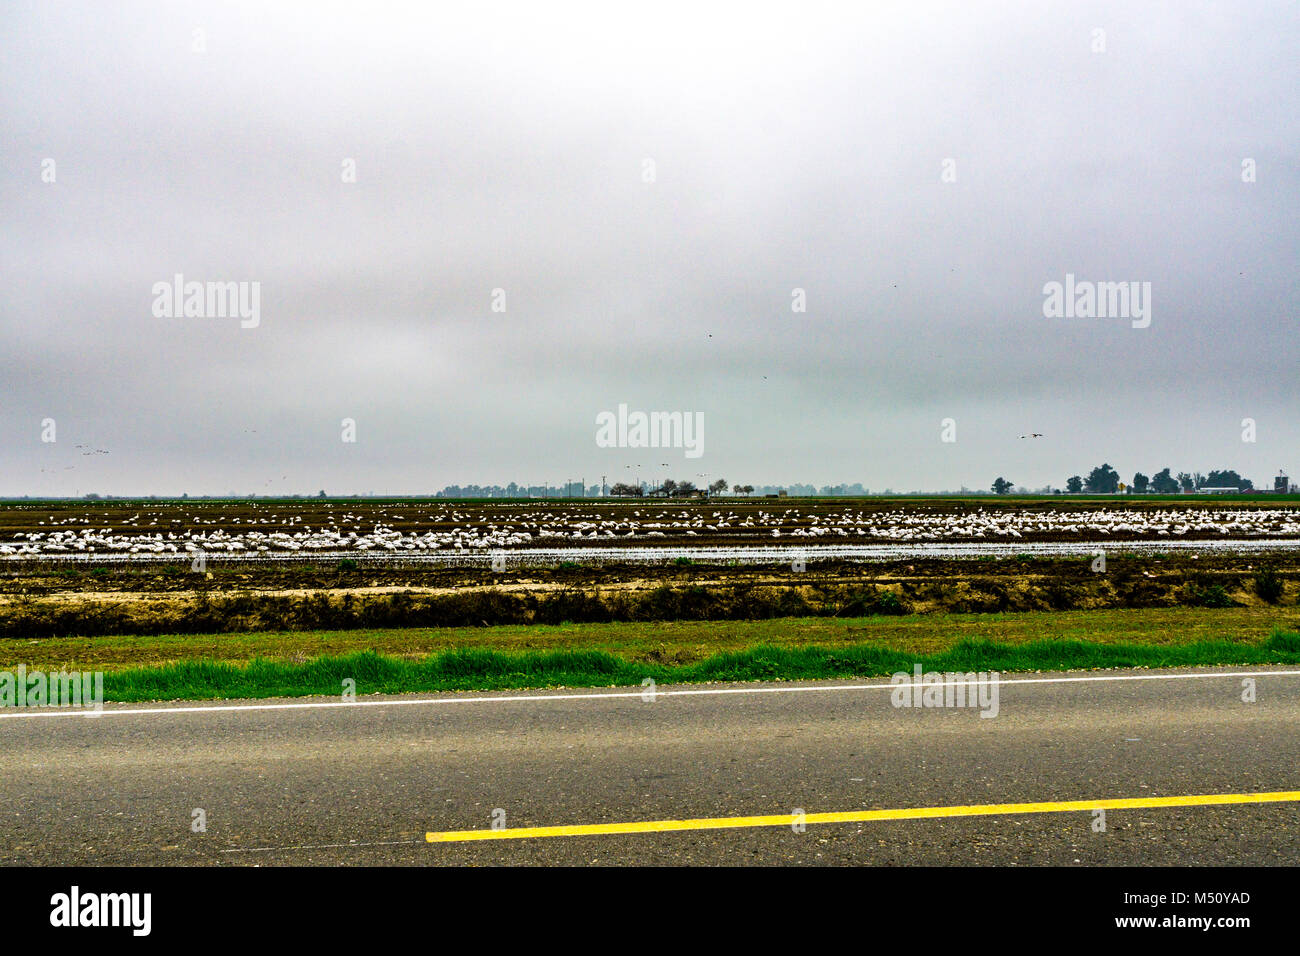 Snow, Ross's and White Front Geese in a rice field near Merced California in the Central Valley of California USA Stock Photo